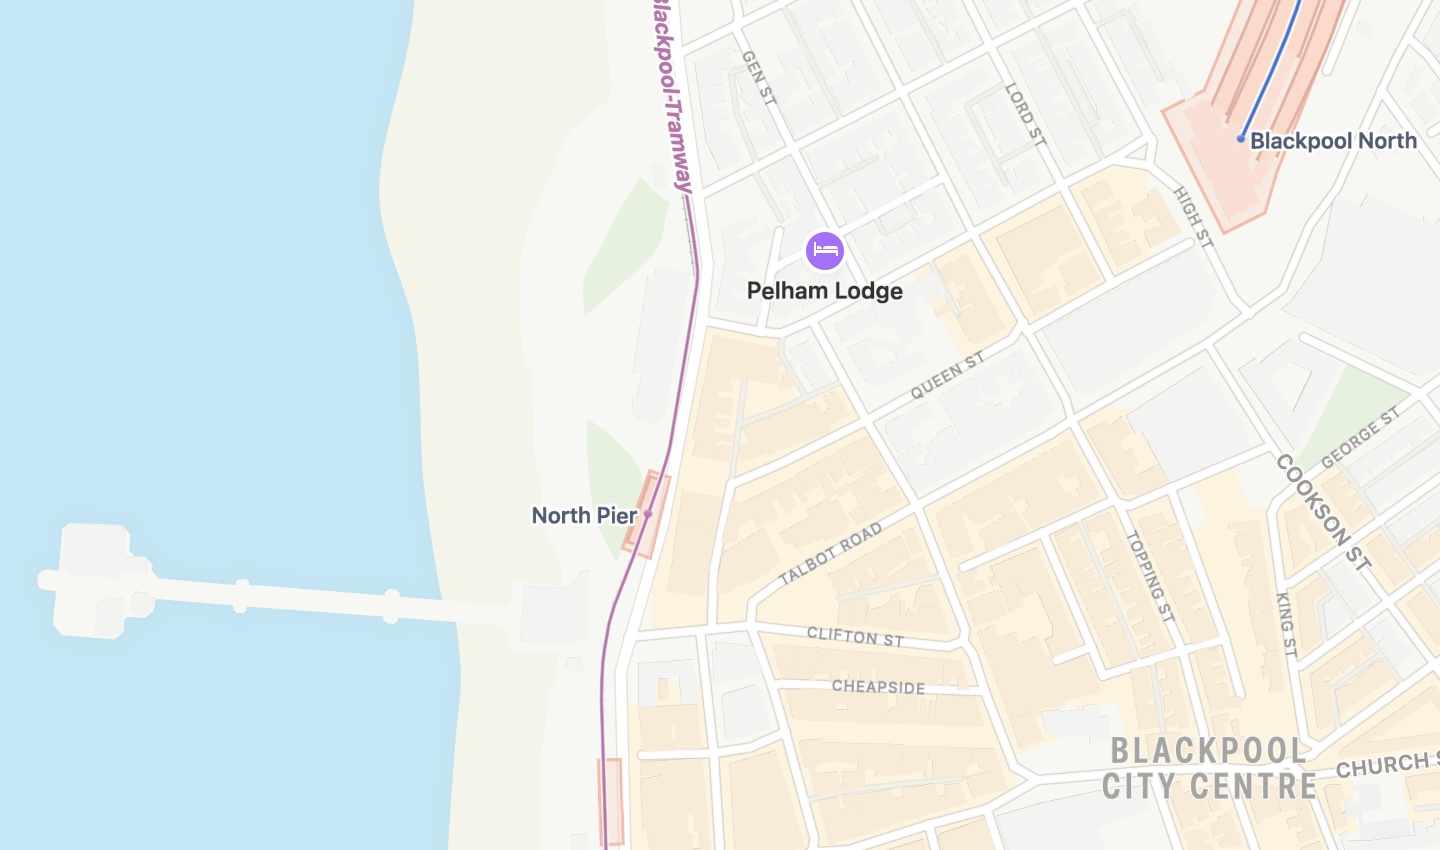 Map of Blackpool city centre with a purple symbol indicating Pelham Lodge's location.